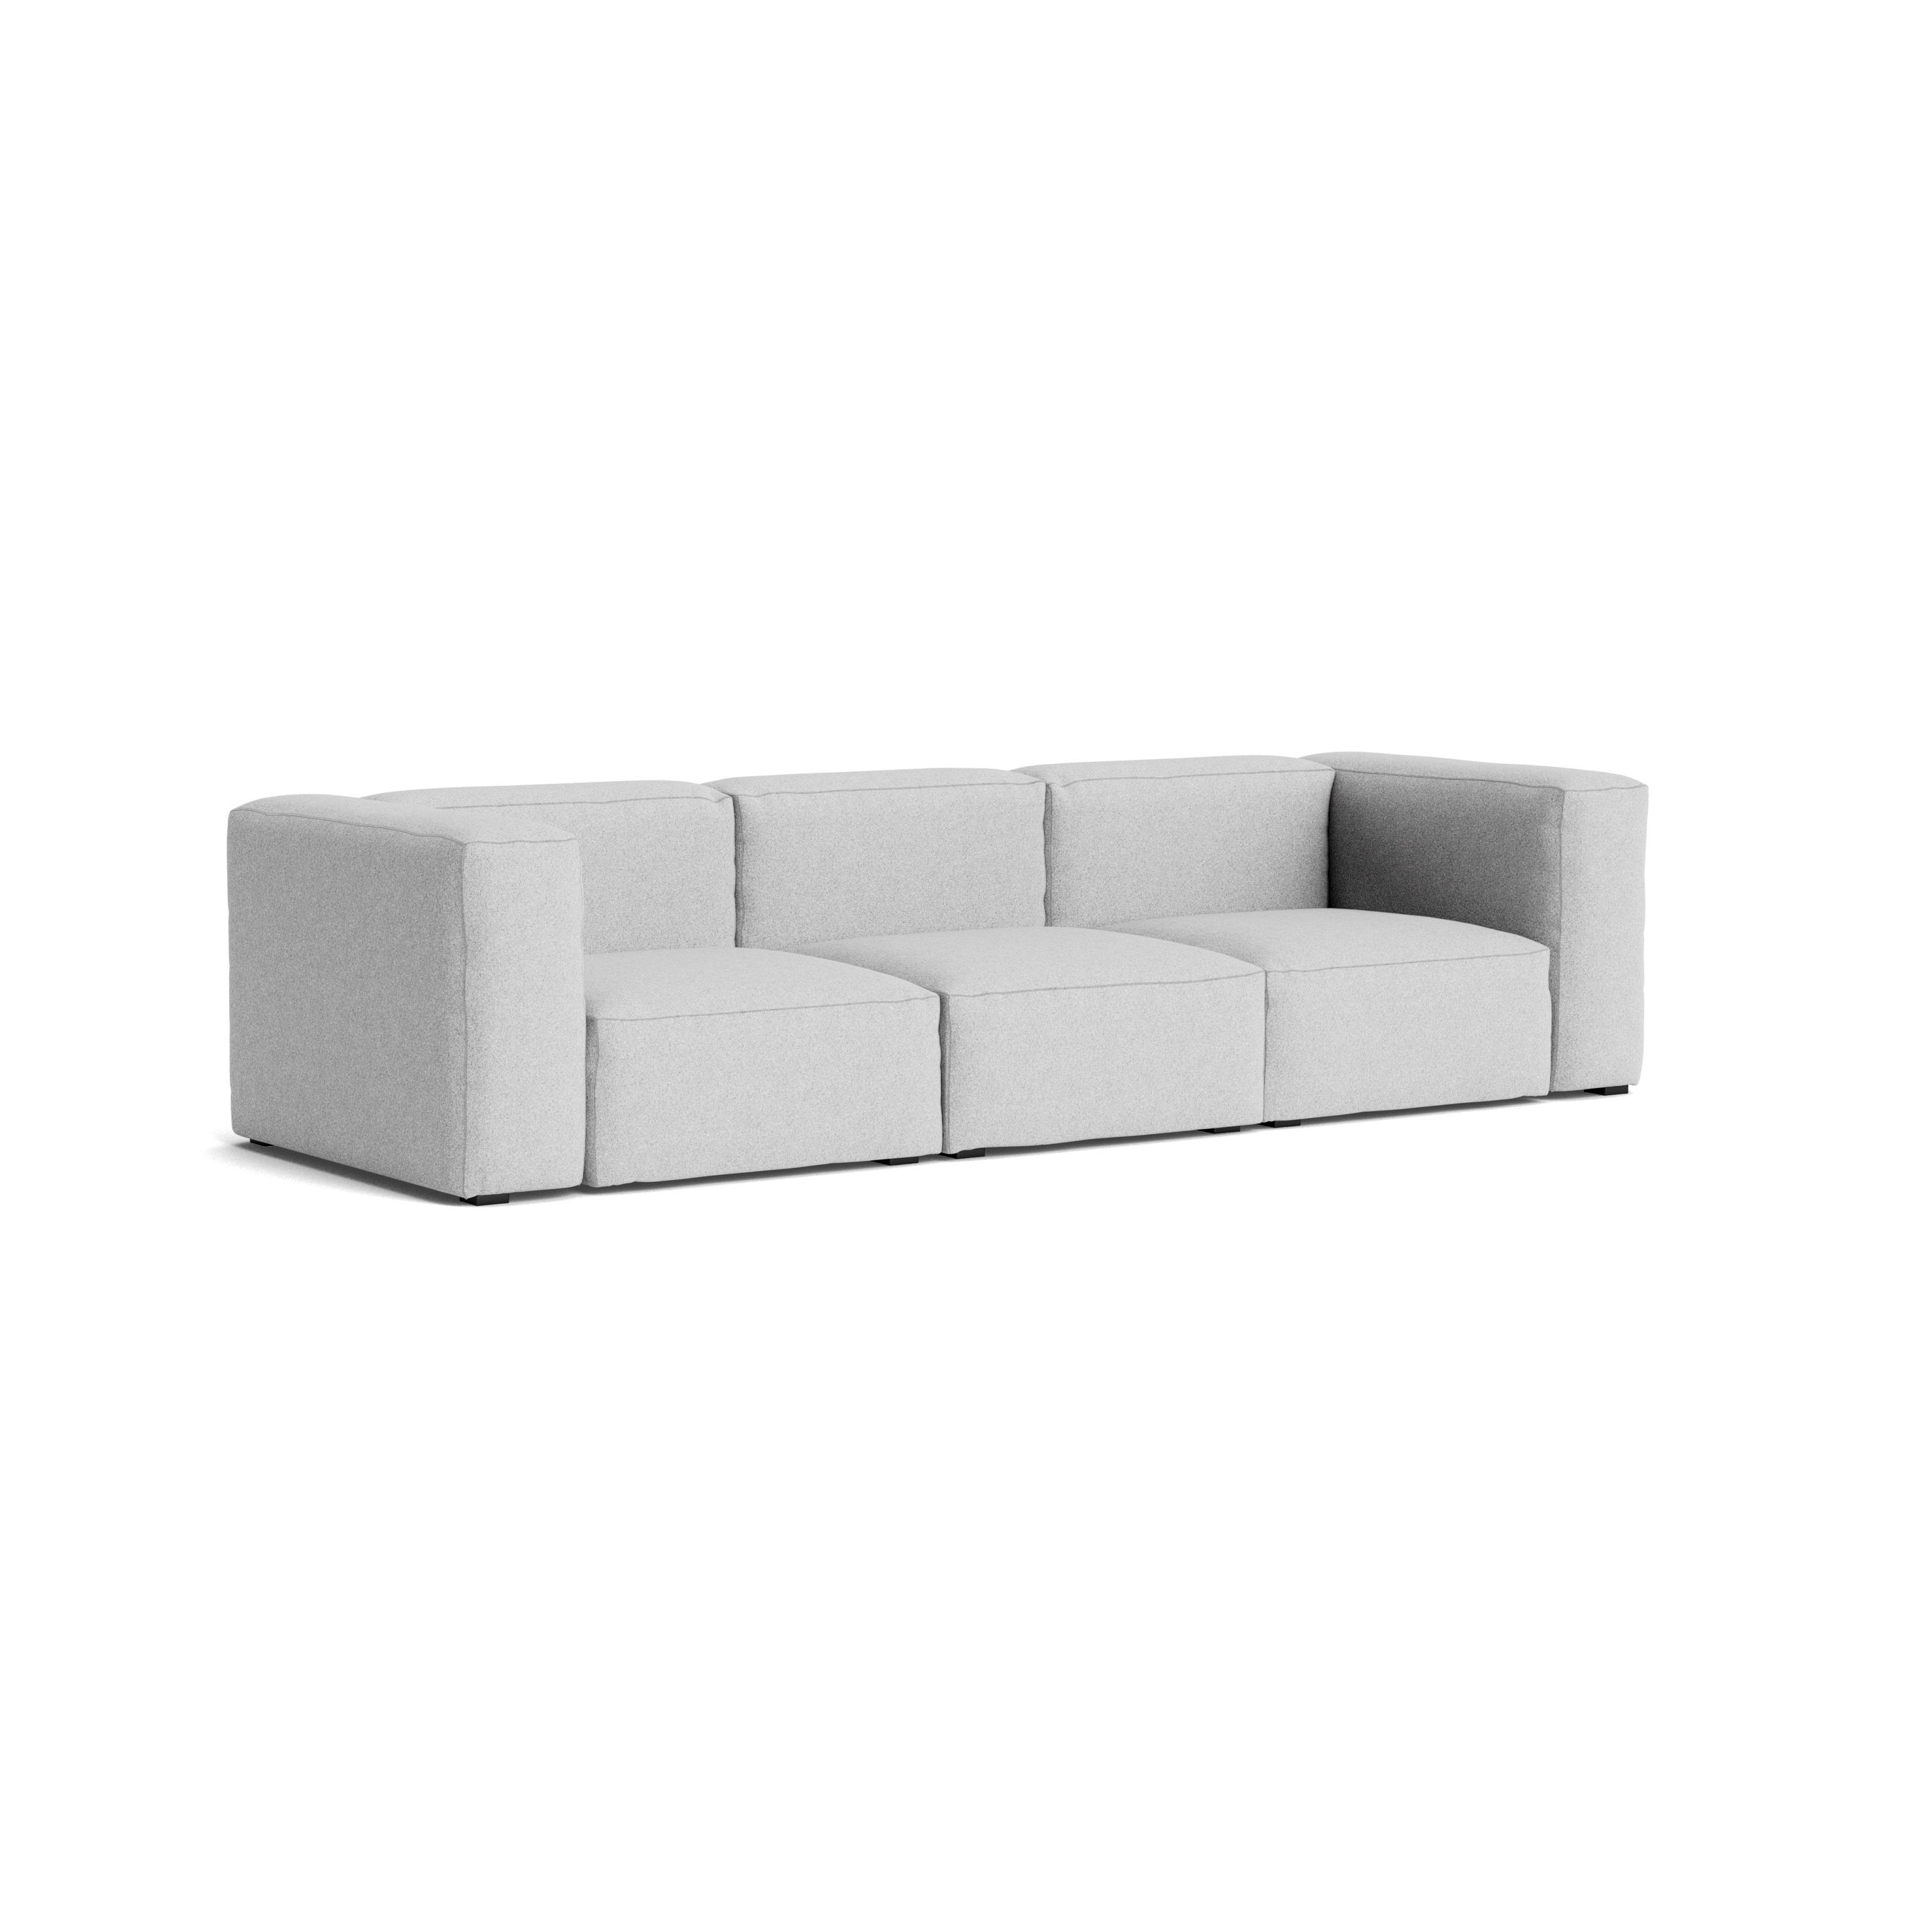 HAY Mags Soft Sofa 3 Seater - Combination 1